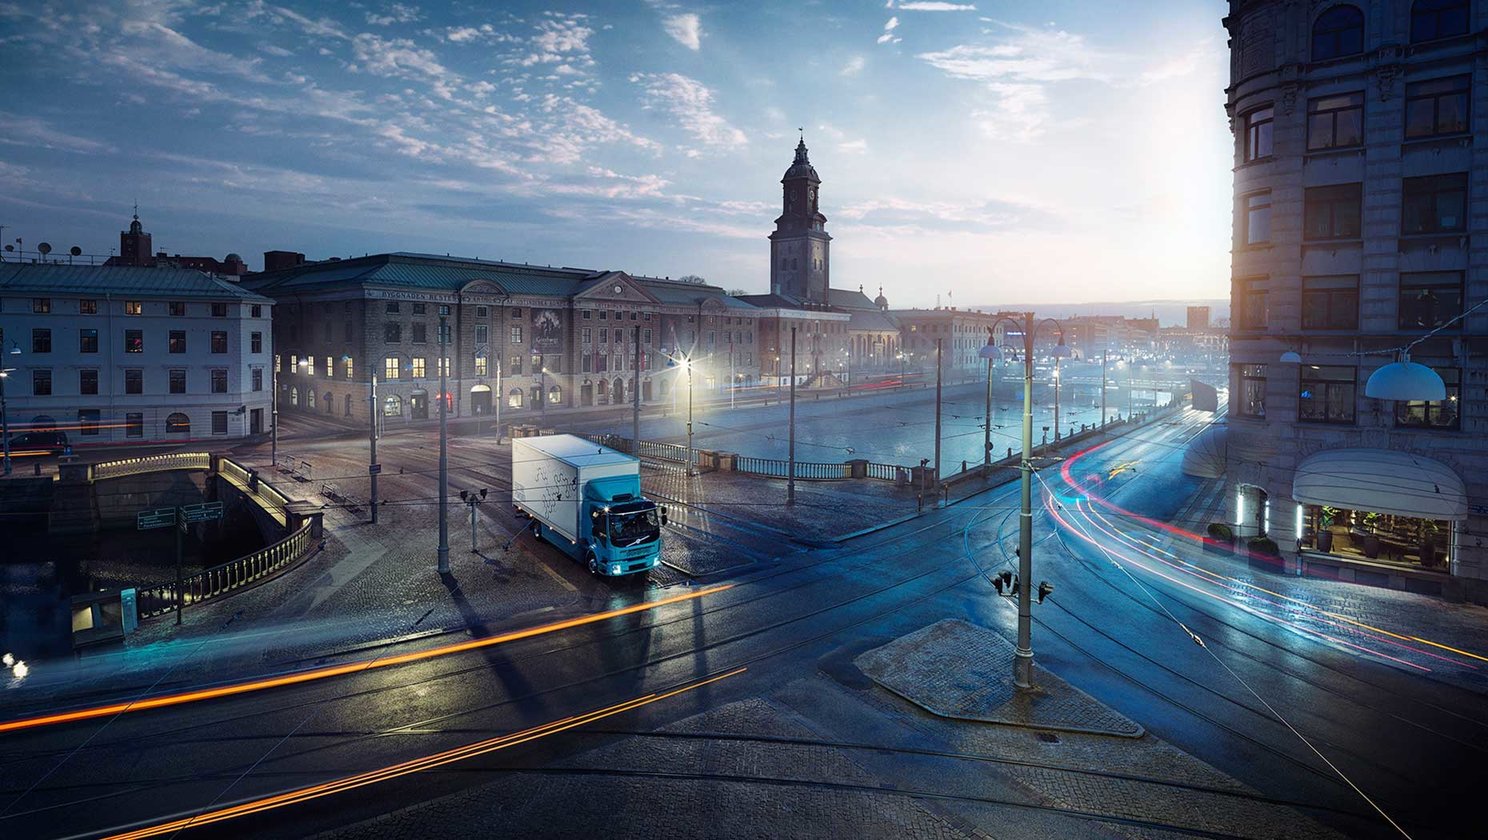 Case Study – Volvo Group implements an IoT tracking solution in its trucks plant, using Actility LoRaWAN GPS trackers and network management.